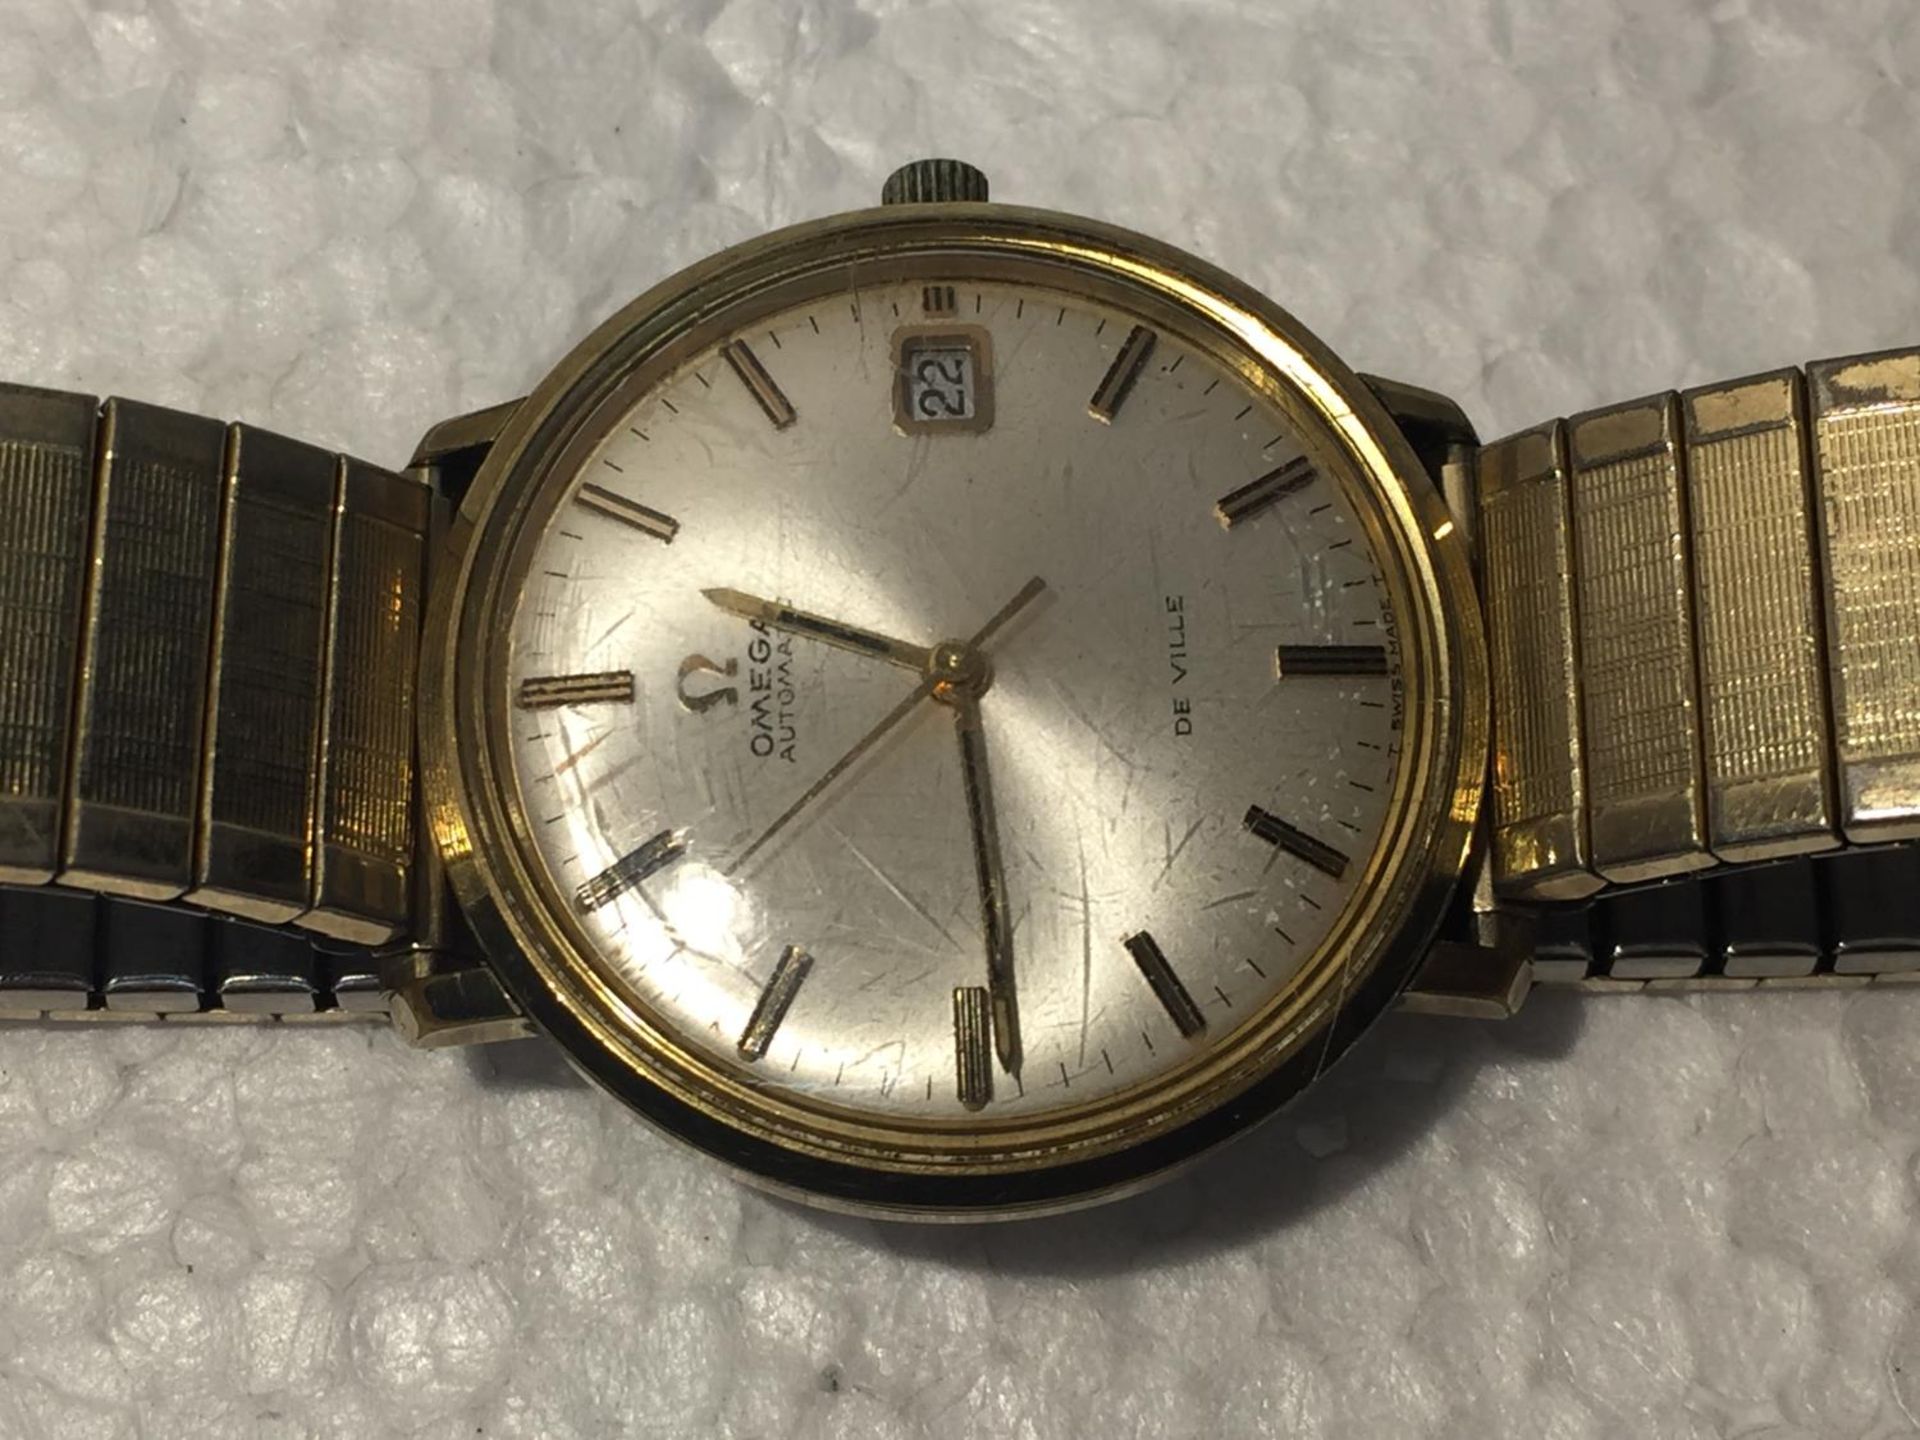 A VINTAGE OMEGA AUTOMATIC DE VILLE WATCH POSSIBLY 9CT GOLD WRIST WATCH IN WORKING ORDER WHEN - Image 2 of 7